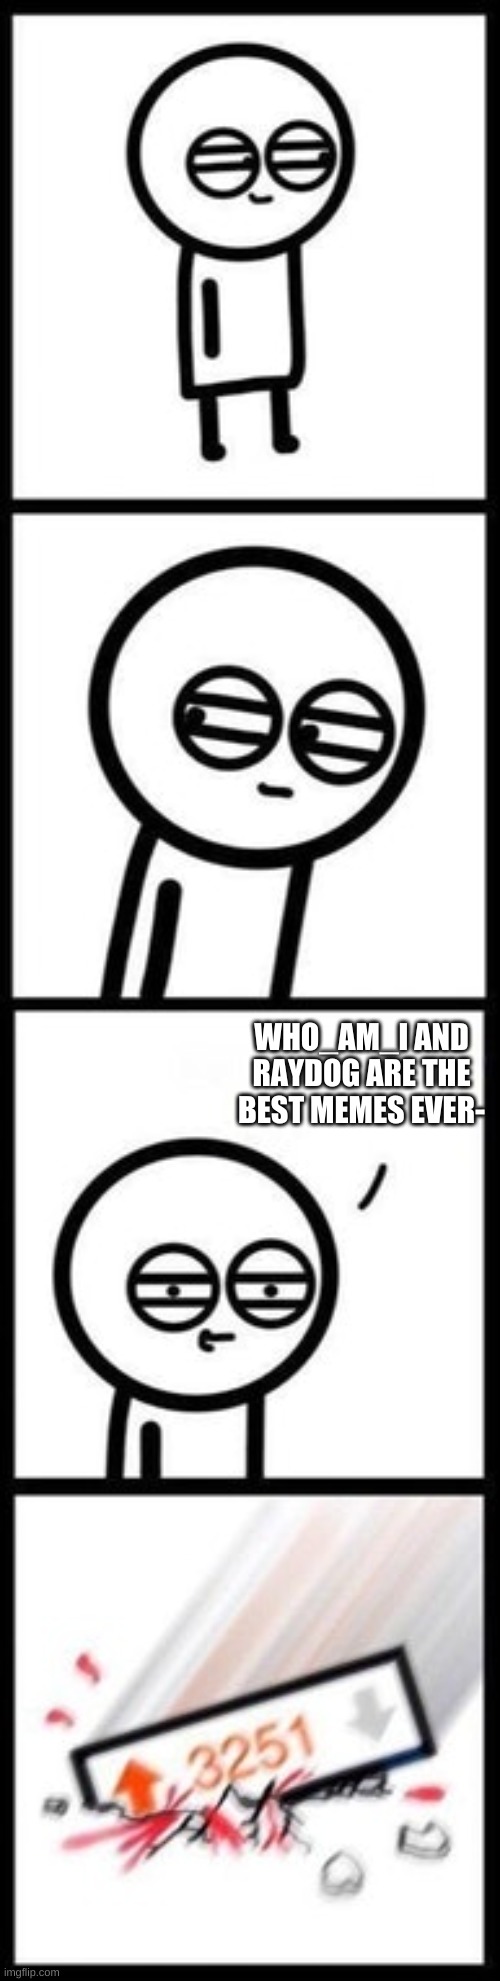 3251 upvotes | WHO_AM_I AND RAYDOG ARE THE BEST MEMES EVER- | image tagged in 3251 upvotes | made w/ Imgflip meme maker